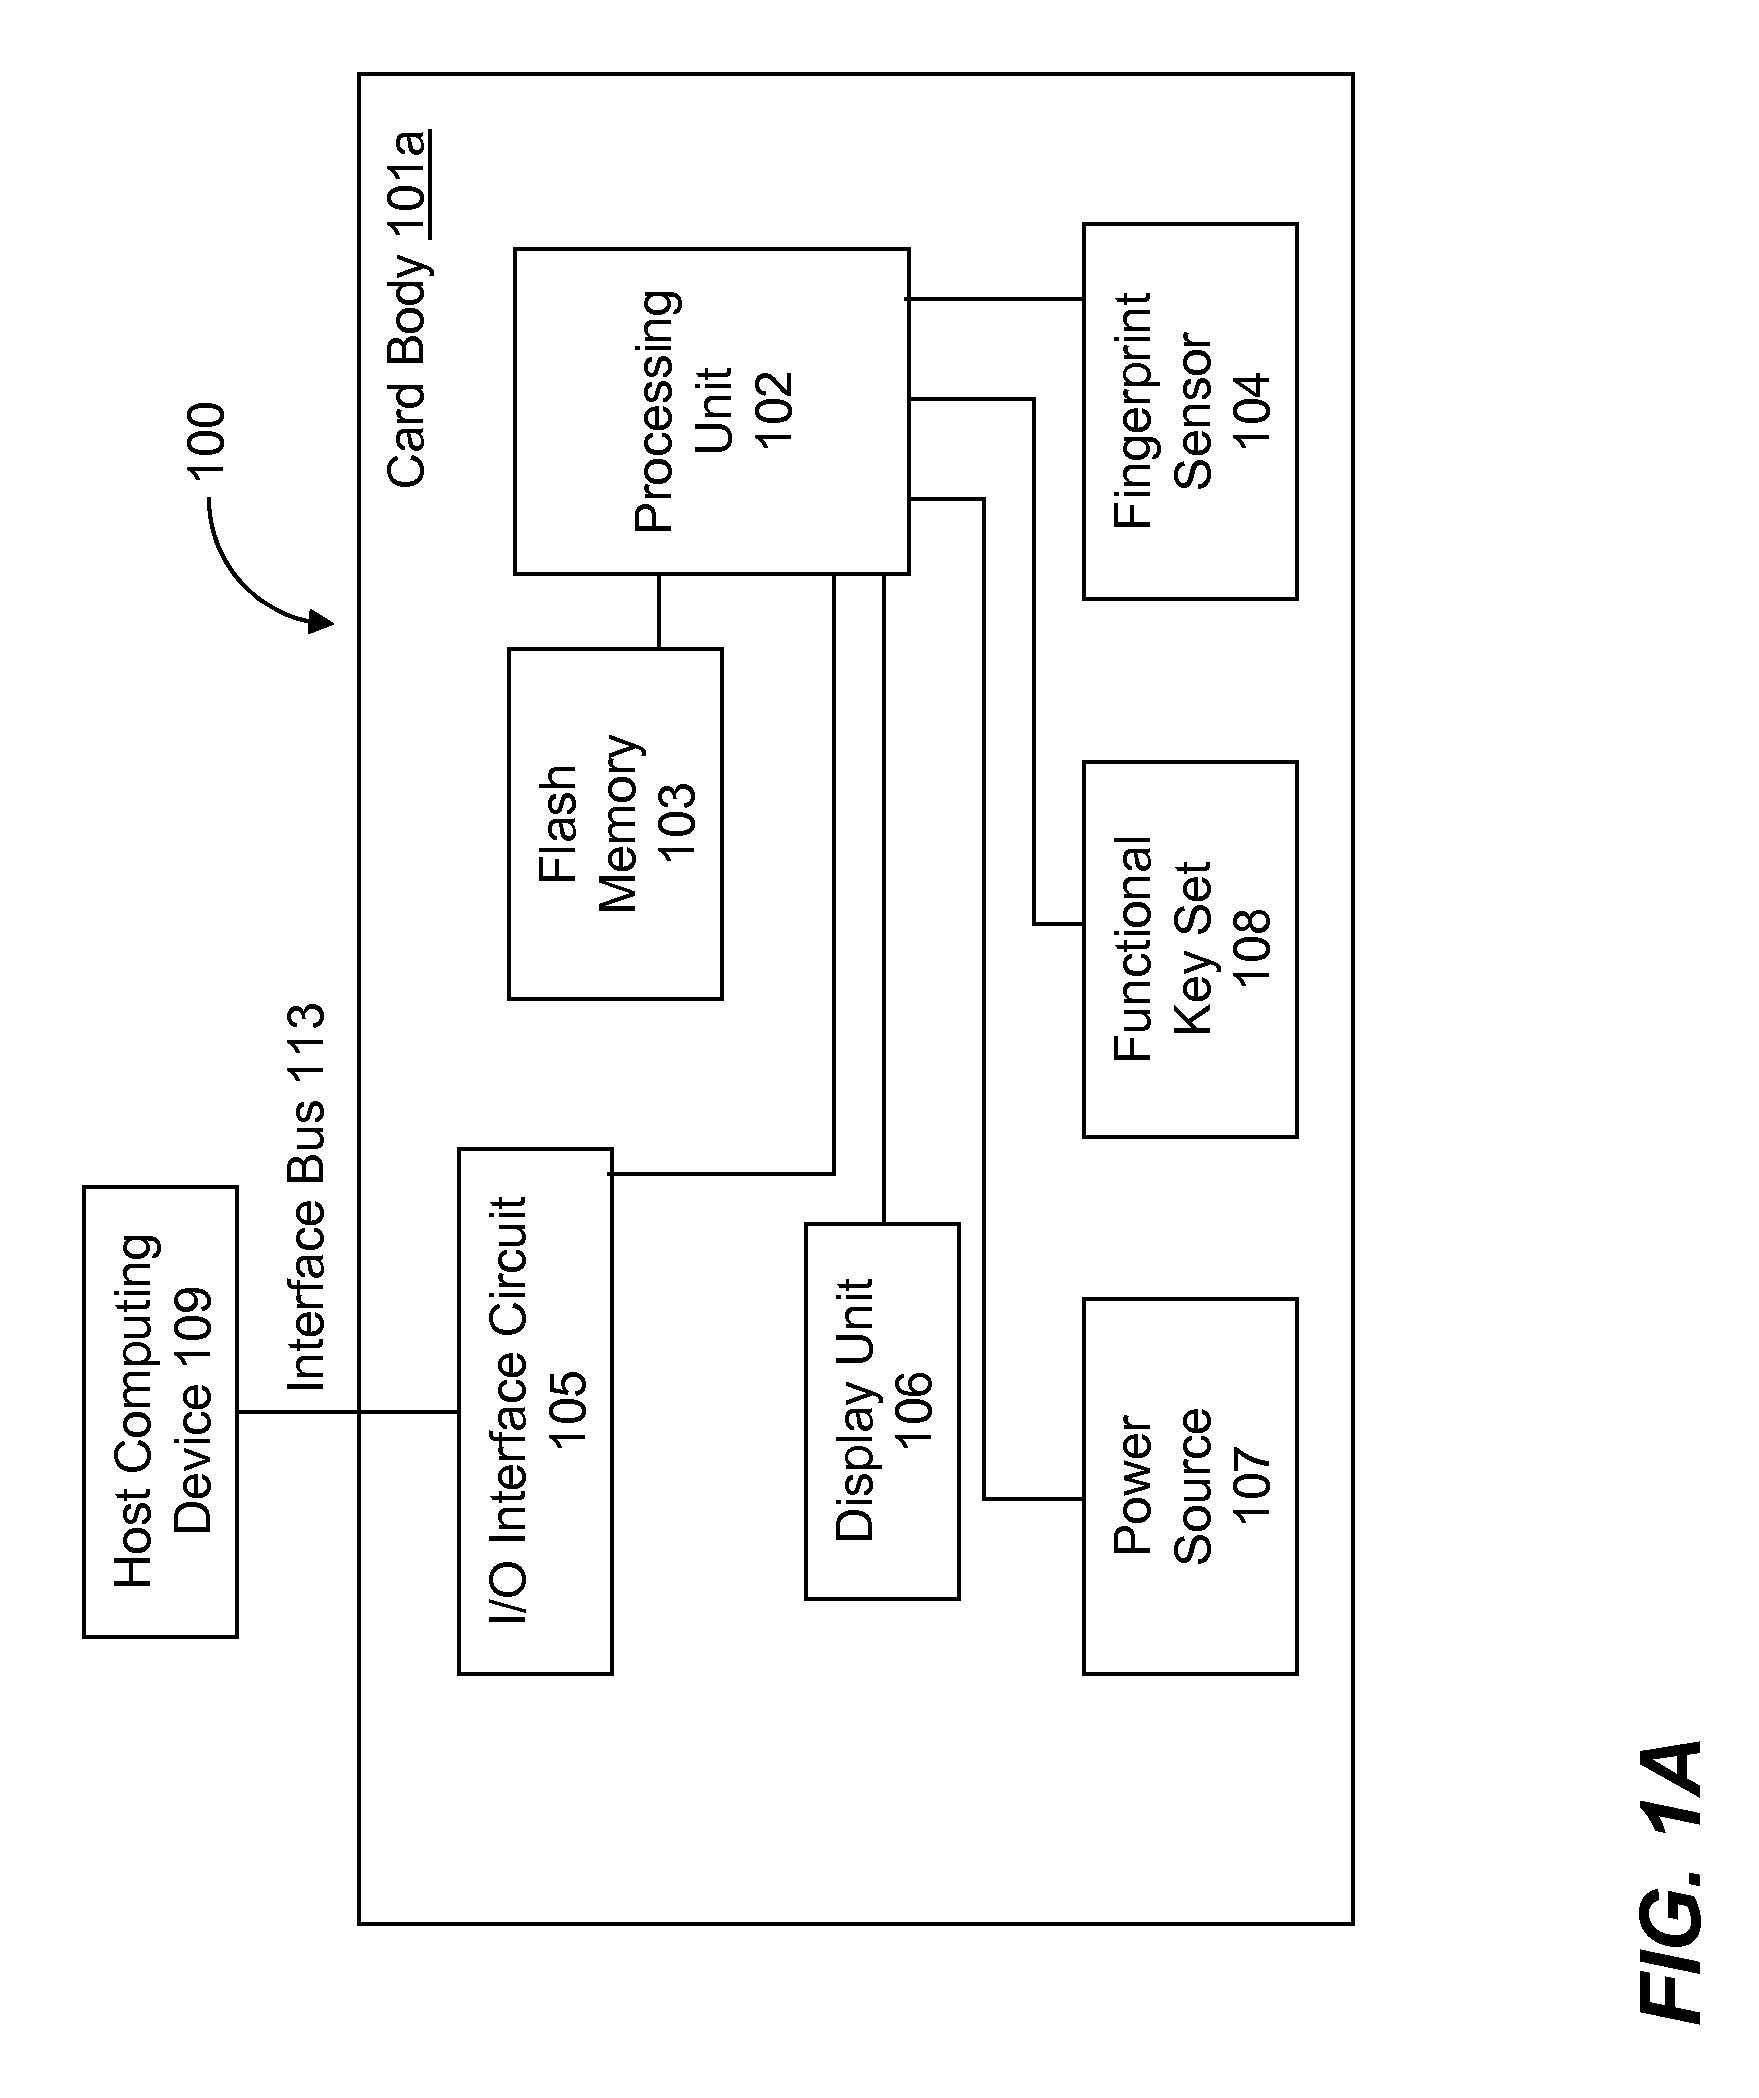 Methods and systems of managing memory addresses in a large capacity multi-level cell (MLC) based flash memory device